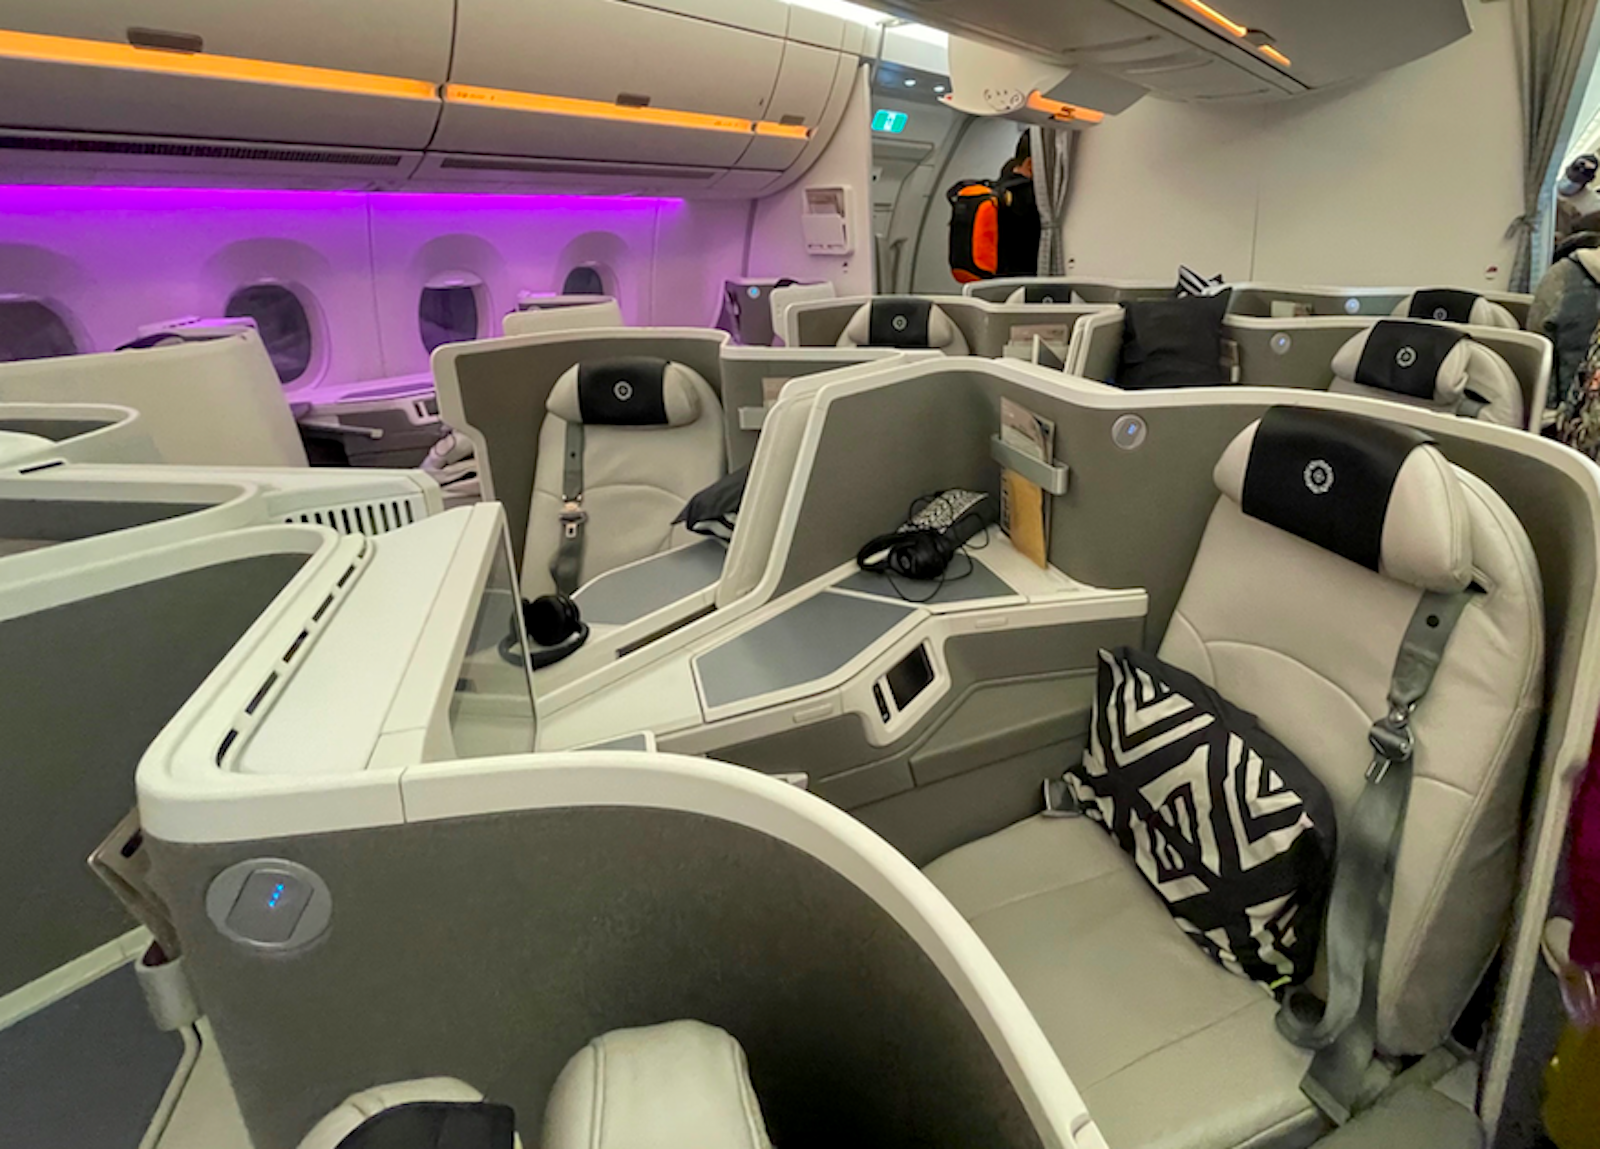 vacation in fiji airlines seat with purple lights